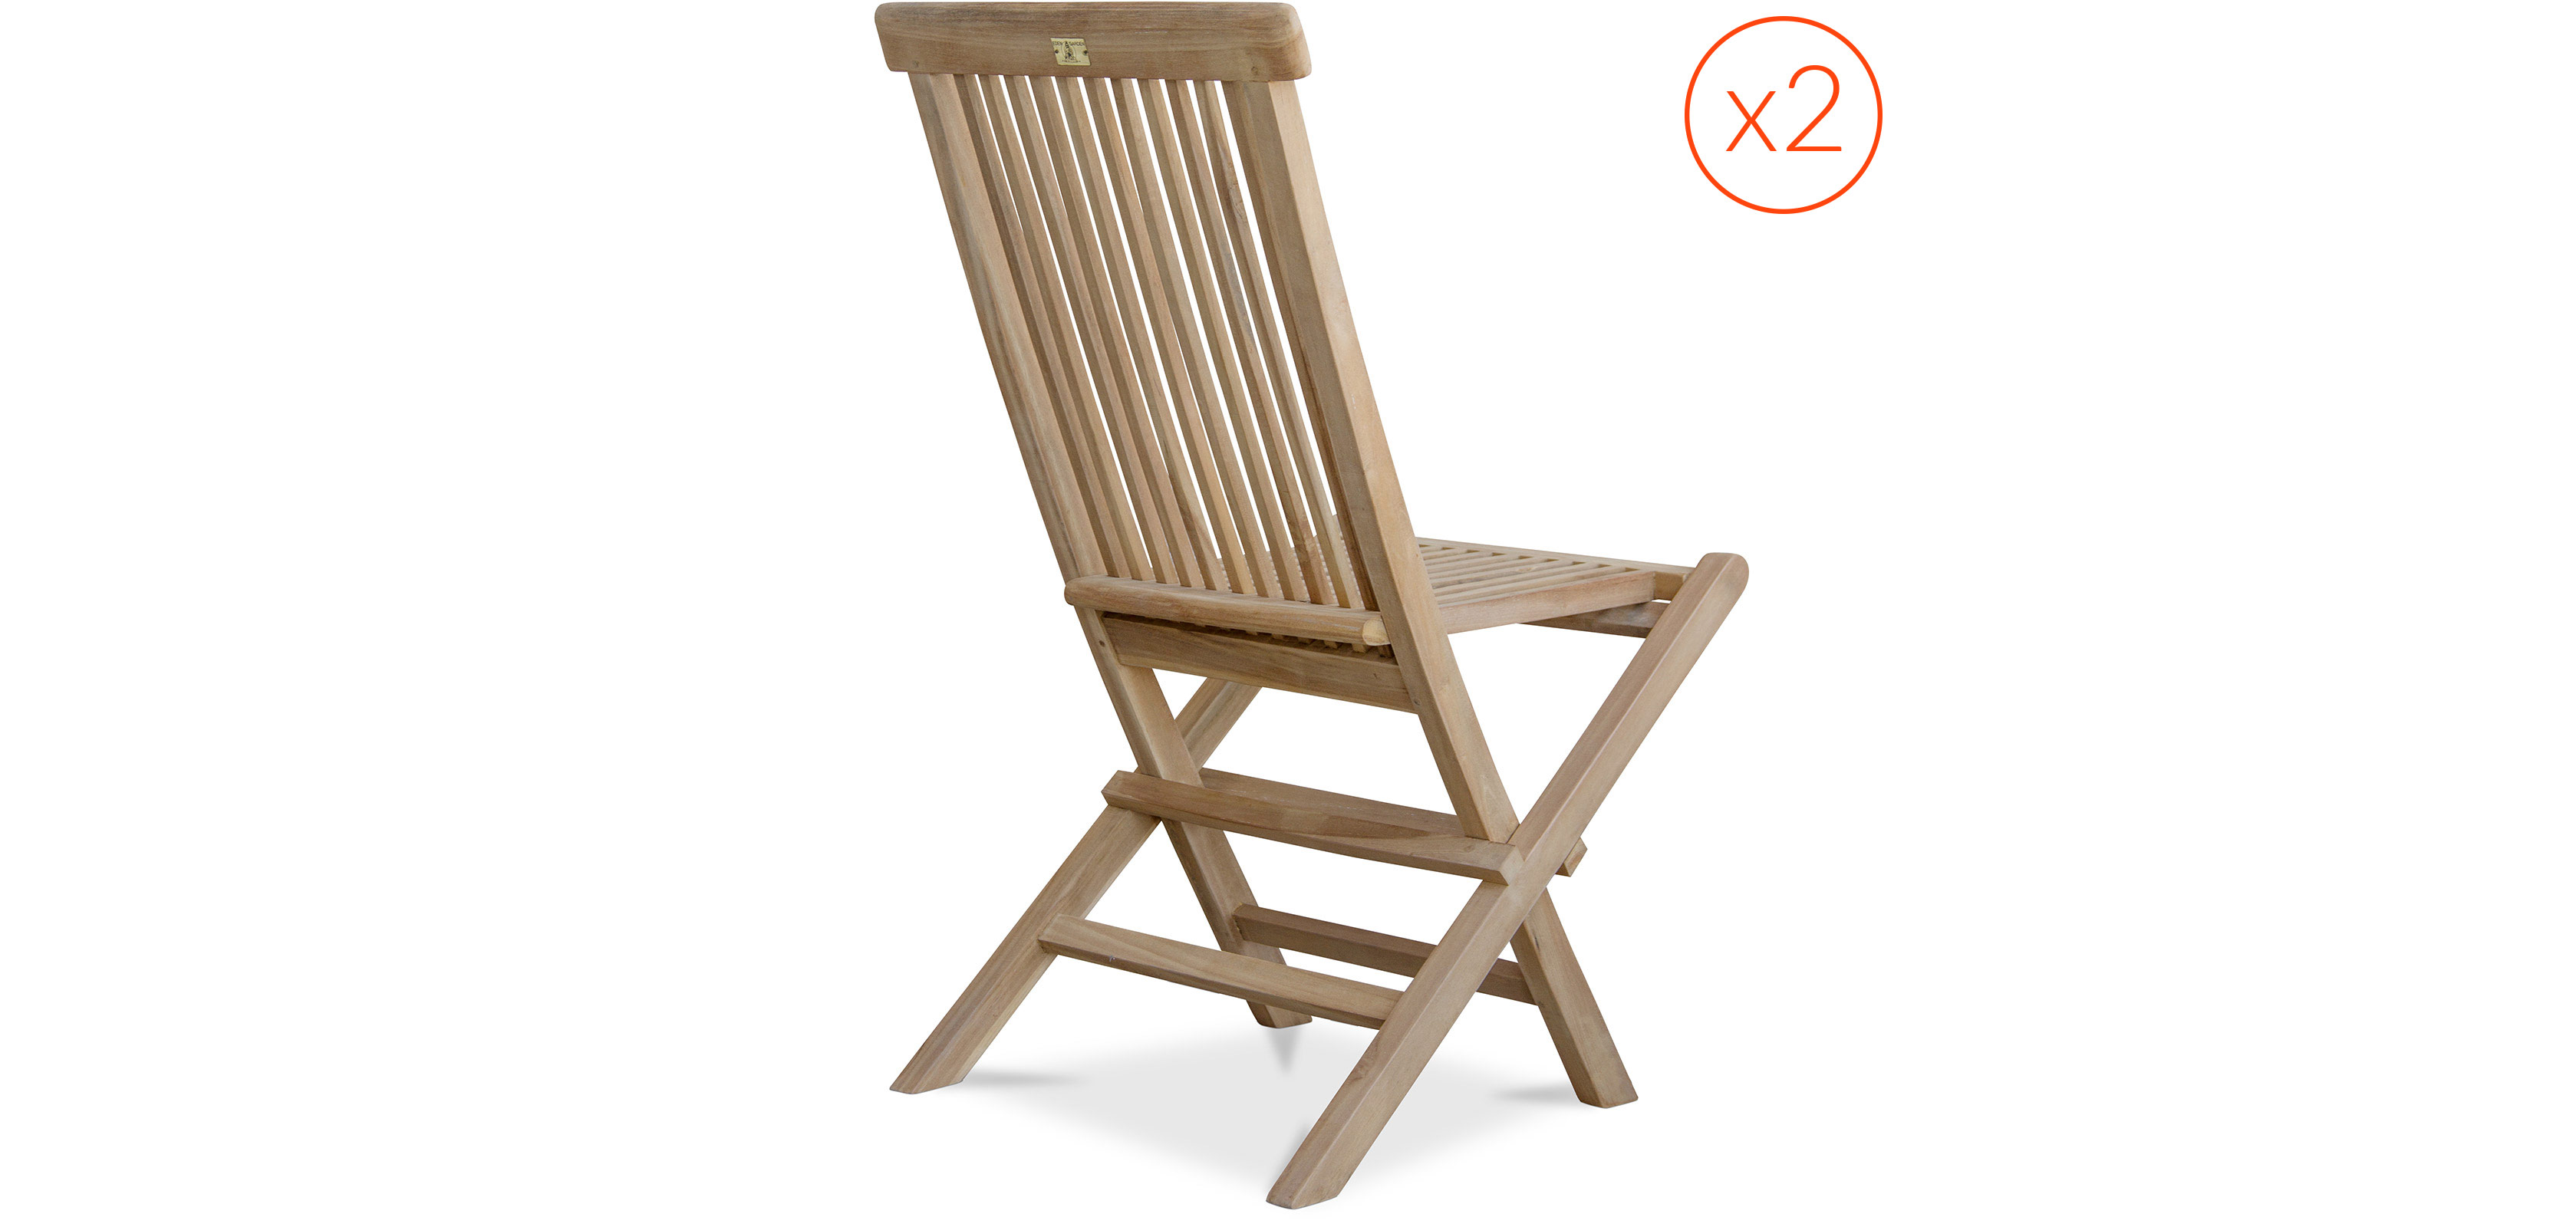 Pack of 2 - Solid teak garden folding chair - Style